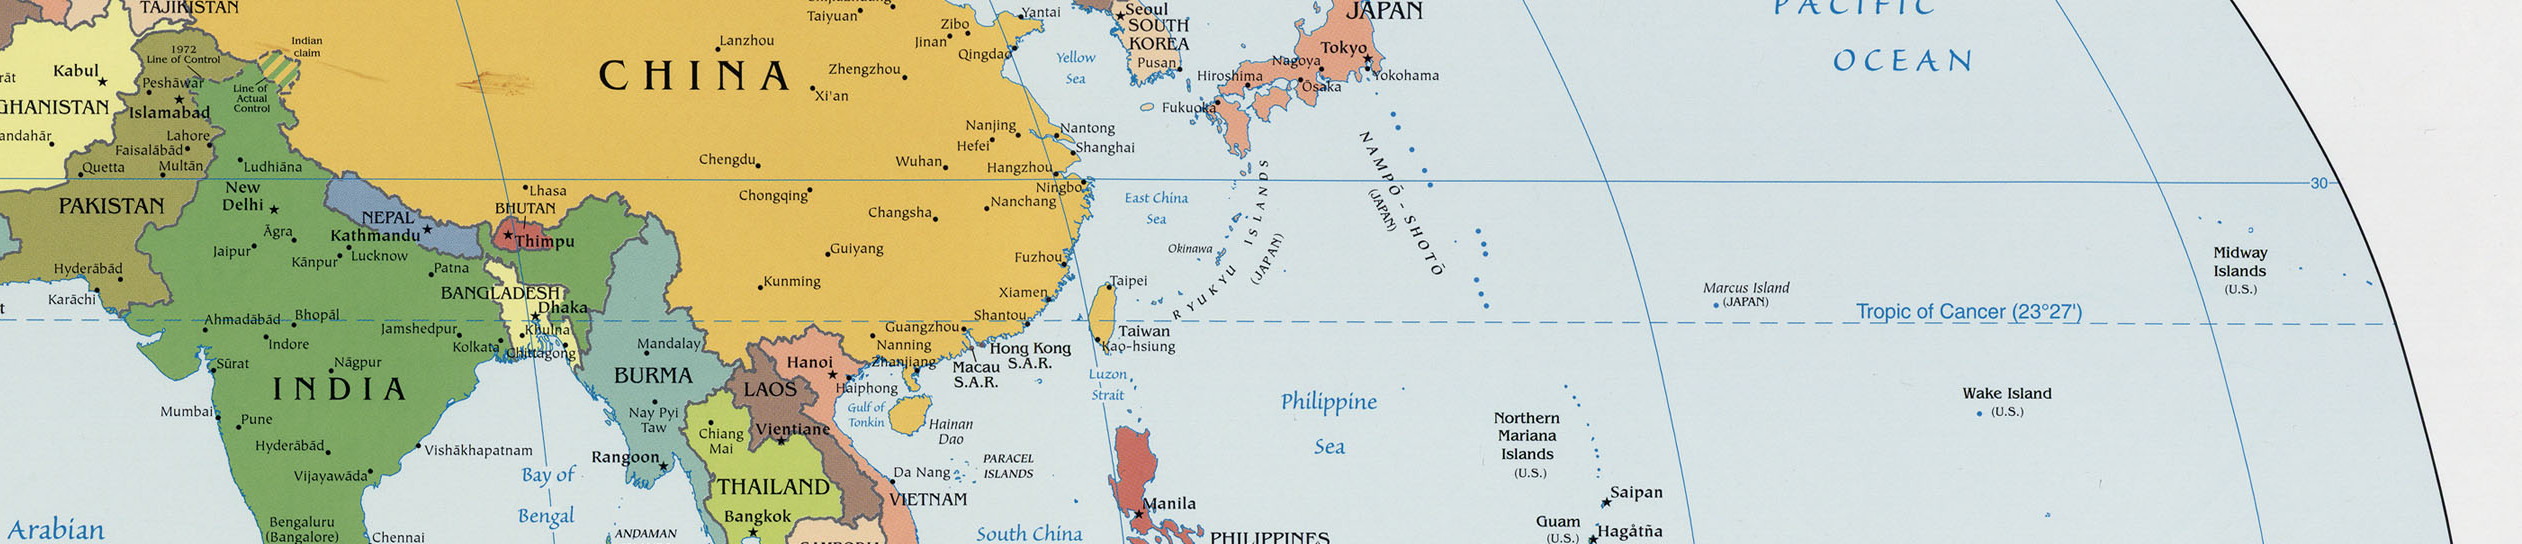 Asia and The Pacific